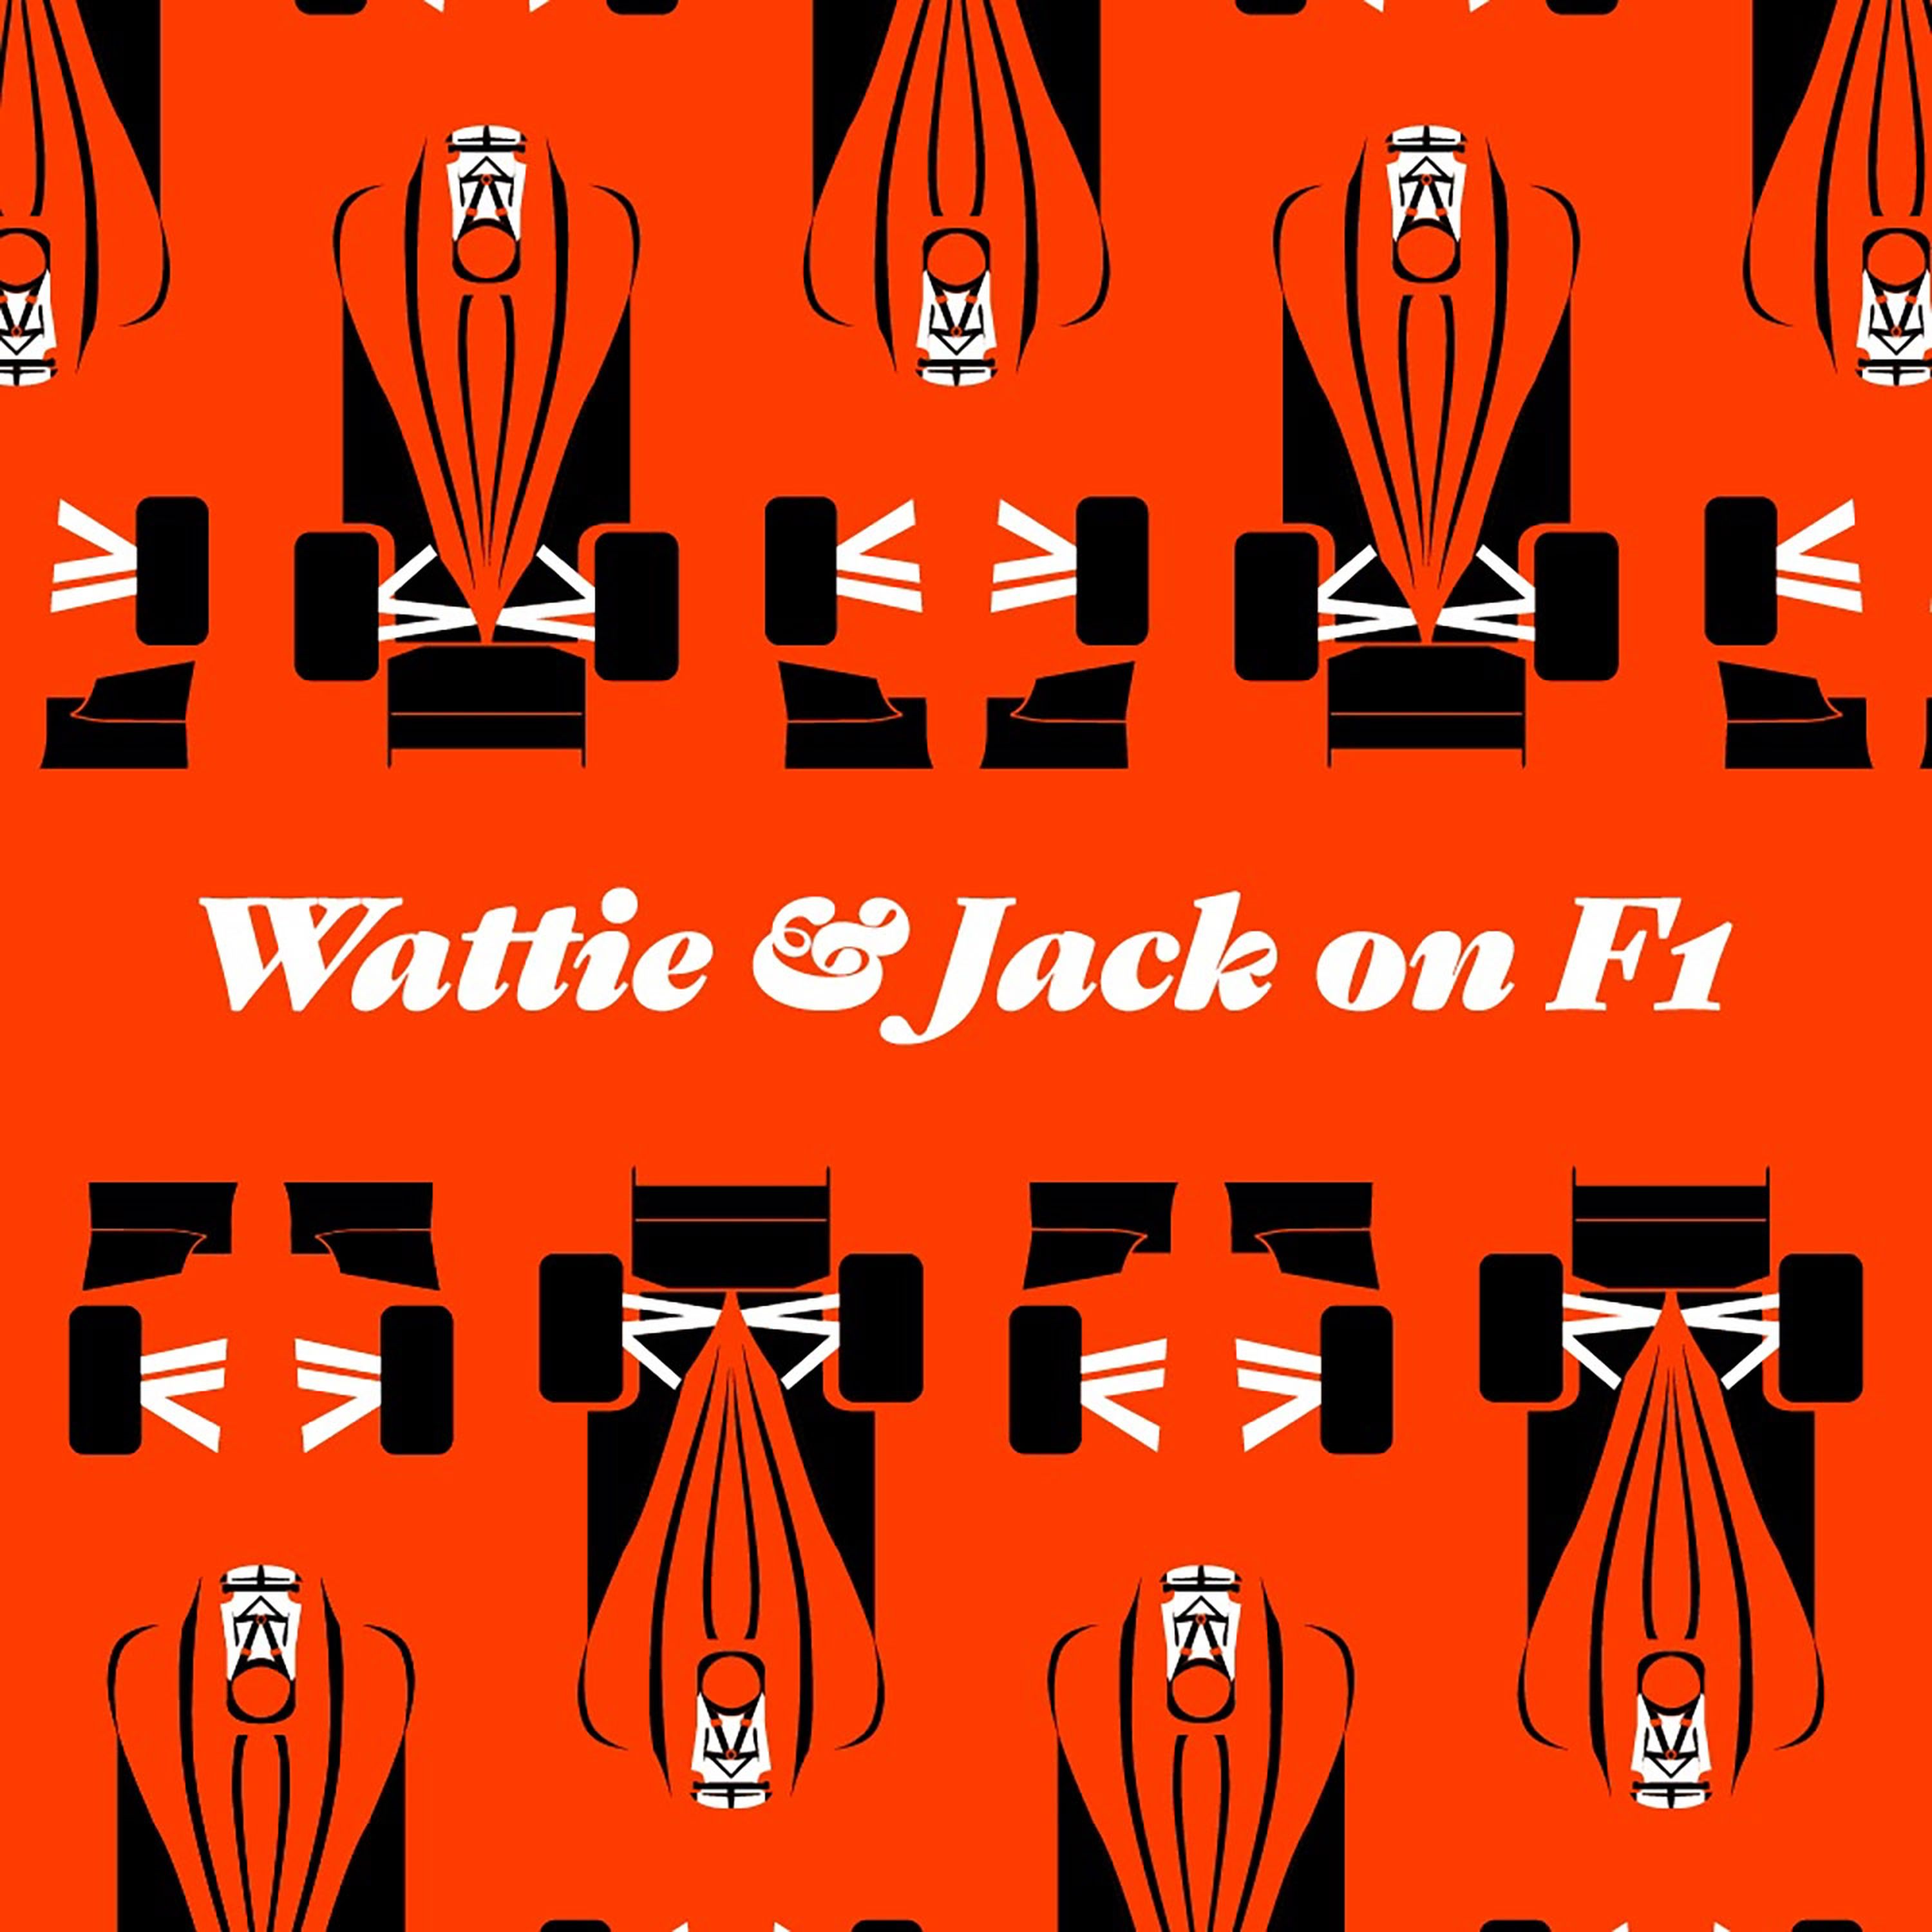 cover art for Grosjean's lobster thermidor and Wattie says flog 'em